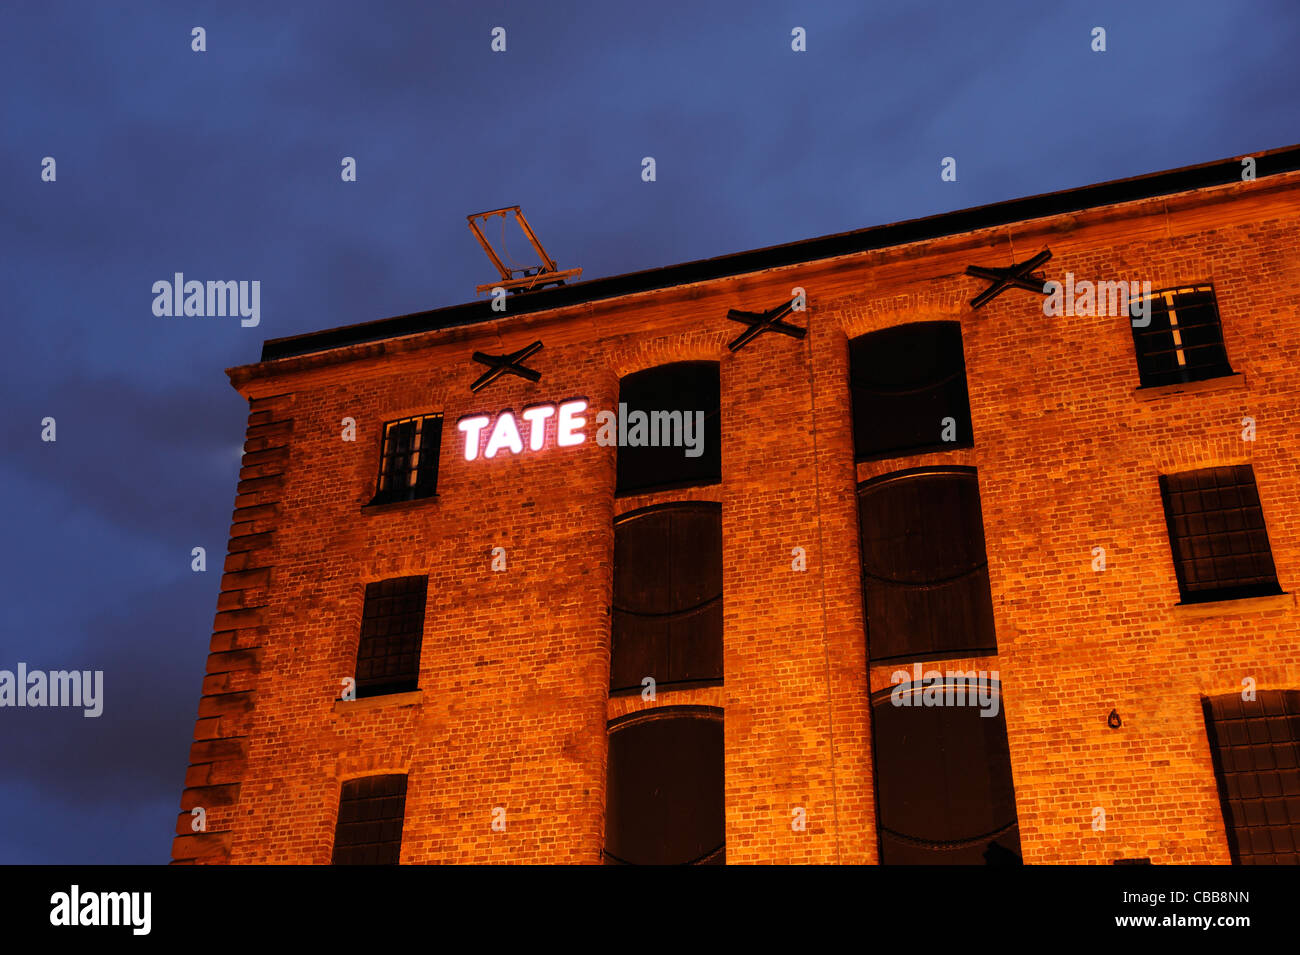 La Tate Liverpool sign at night Banque D'Images